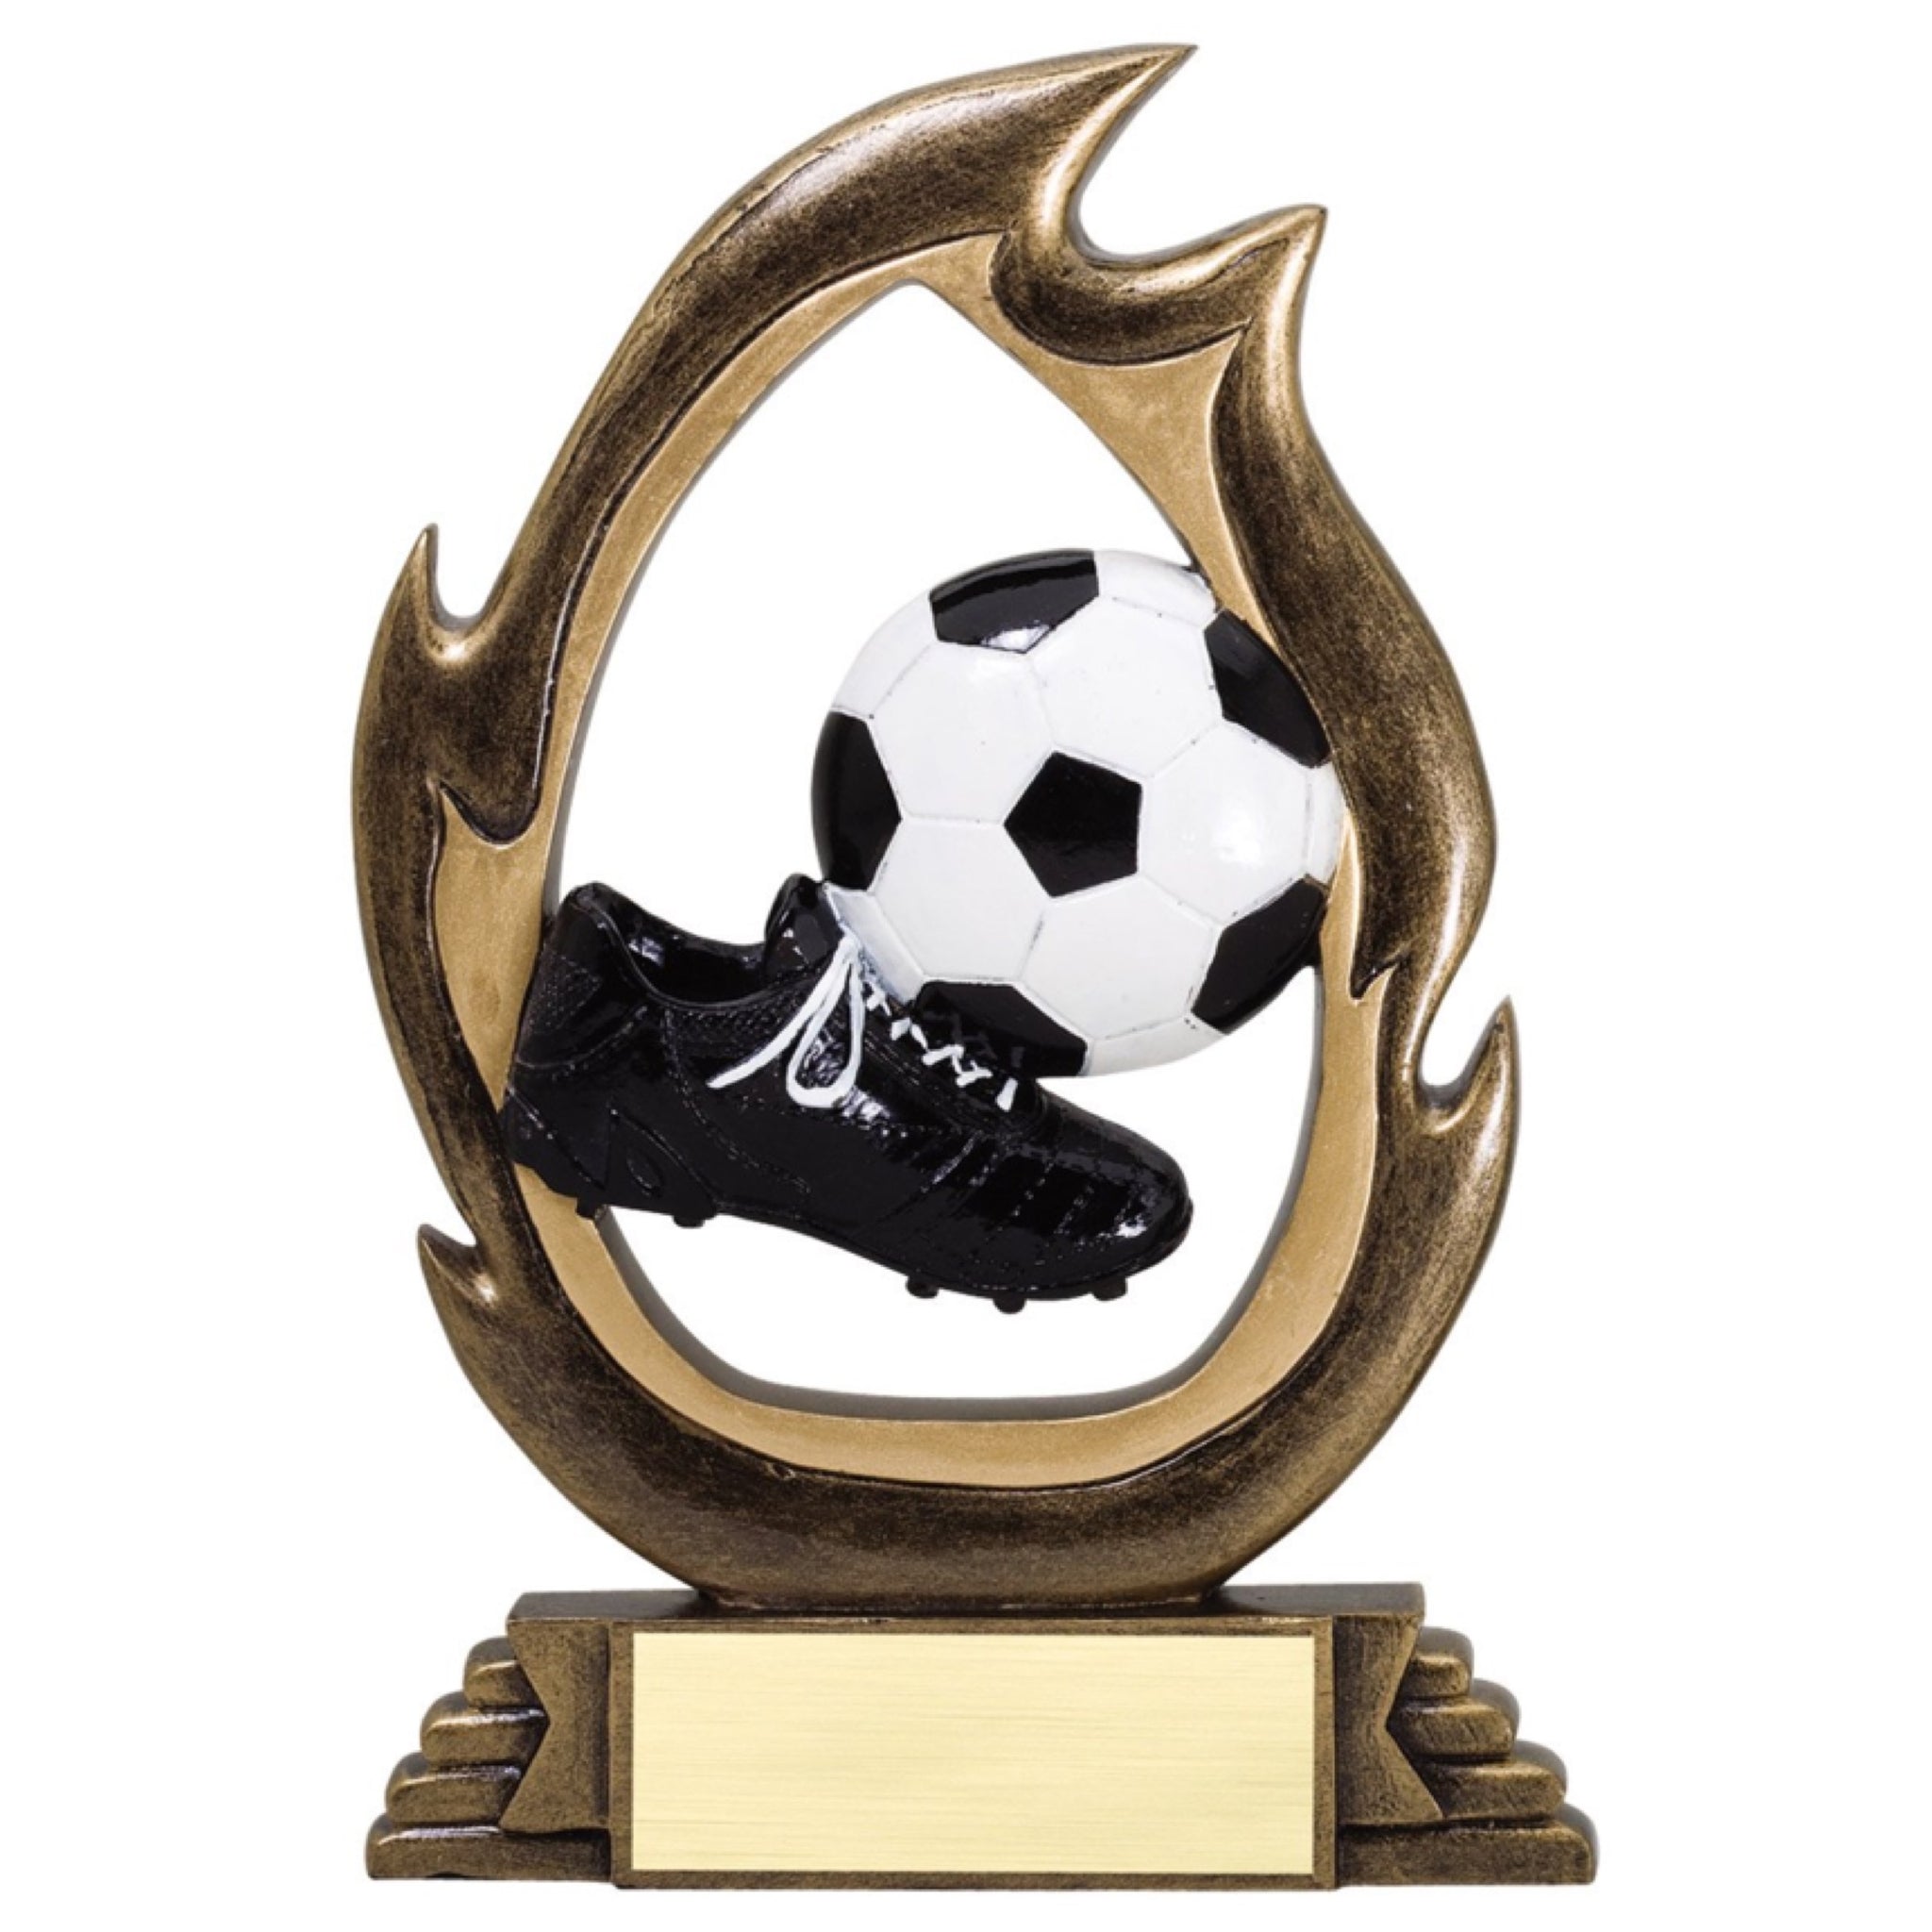 Soccer trophy featuring a bronze flame design with a black soccer cleat and black and white soccer ball inside.